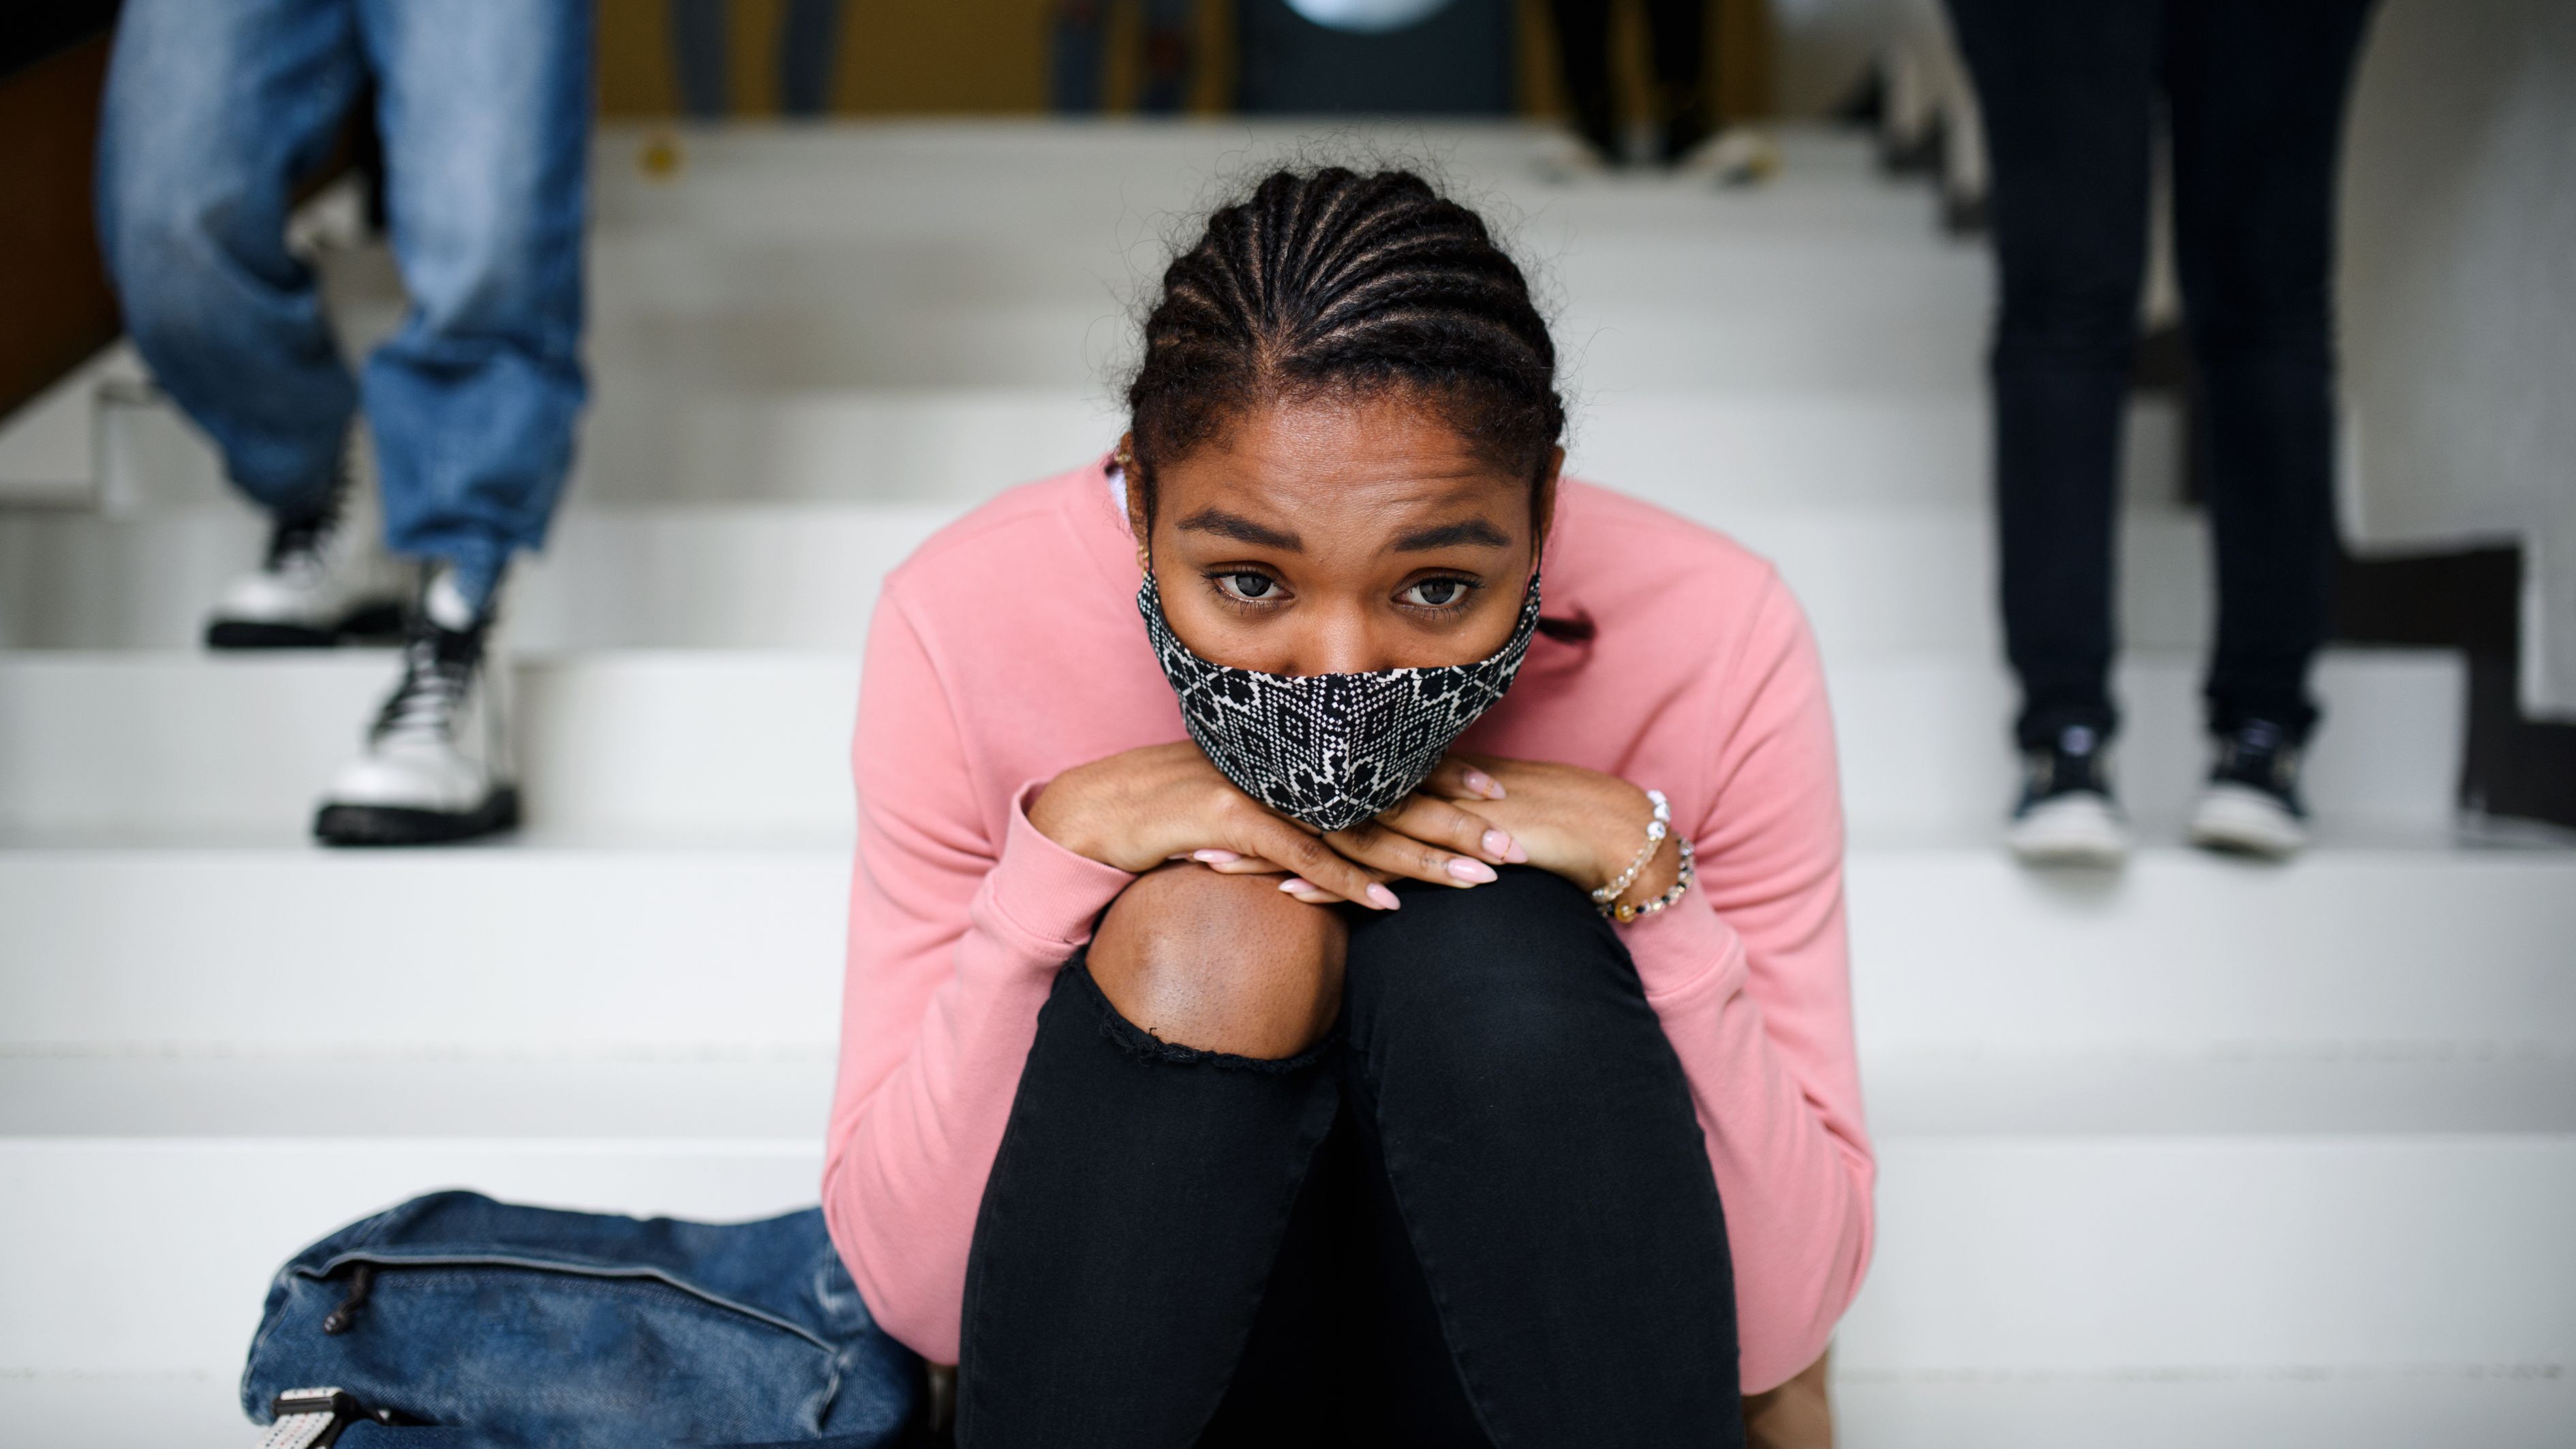 A teenager wearing cornrows, a pink sweater and a mask sits on a staircase with her hands and chin on her knees while peers walk past.